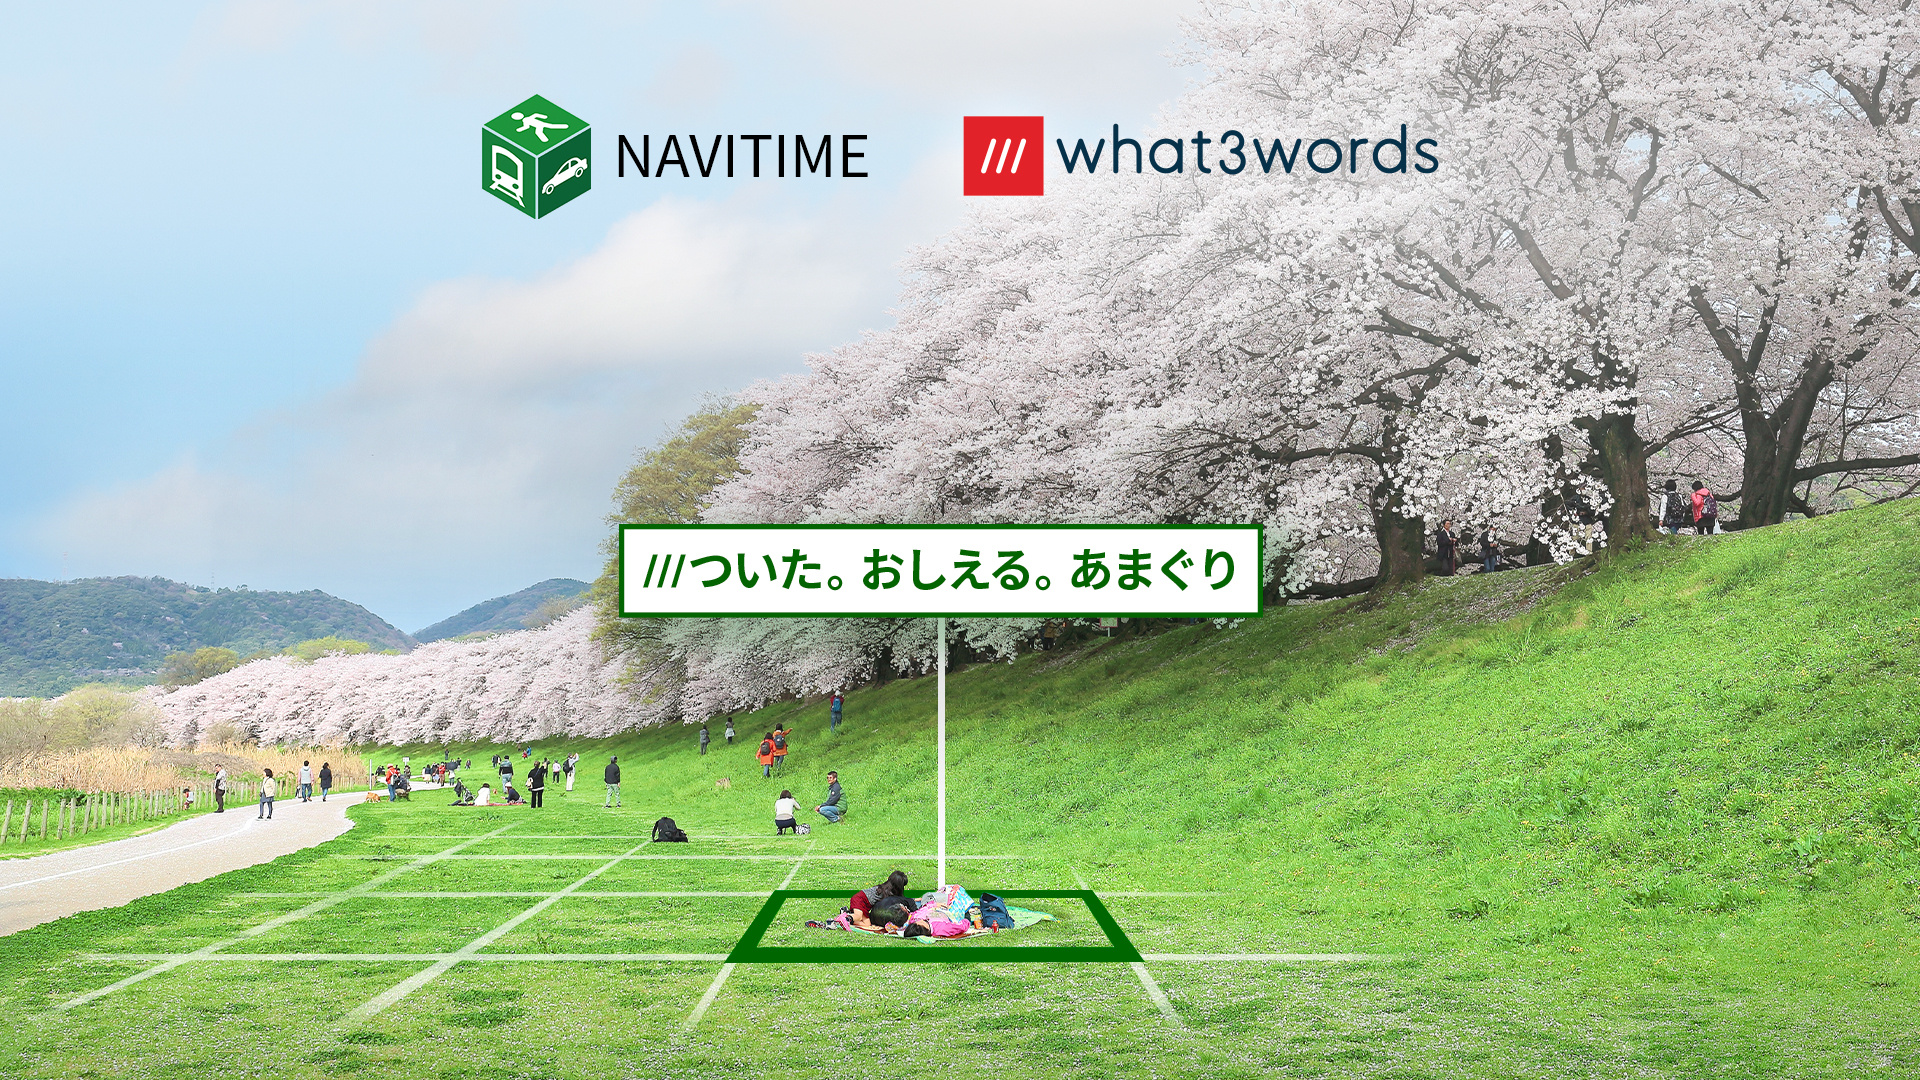 11900-what3words-Navitime-co-branded-announcement-Cherry_JP_16x9 (1).jpg